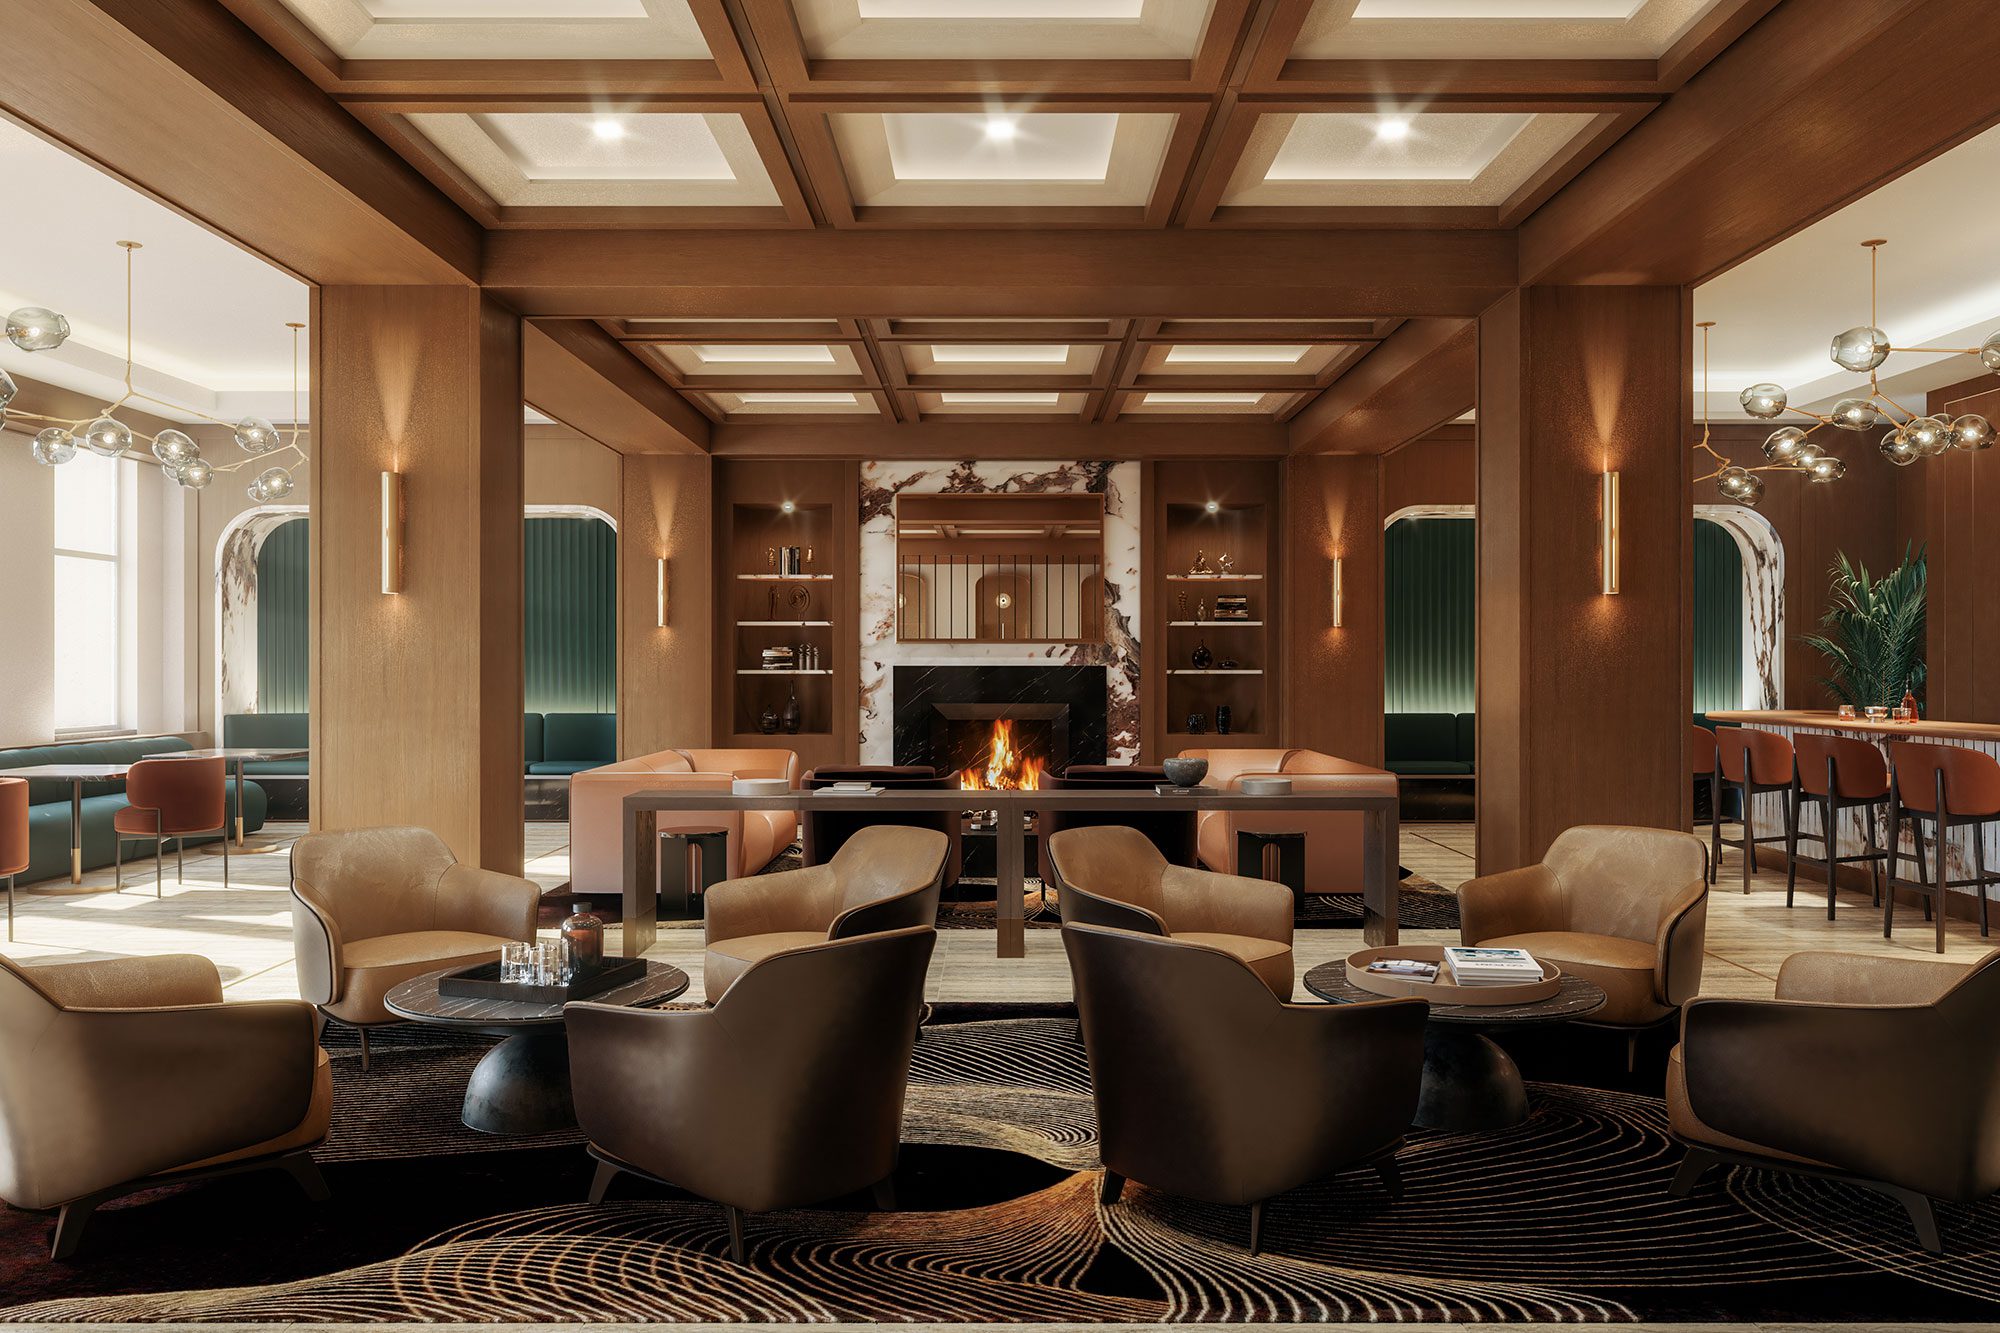 A luxury office building lounge with leather sofas and fireplace